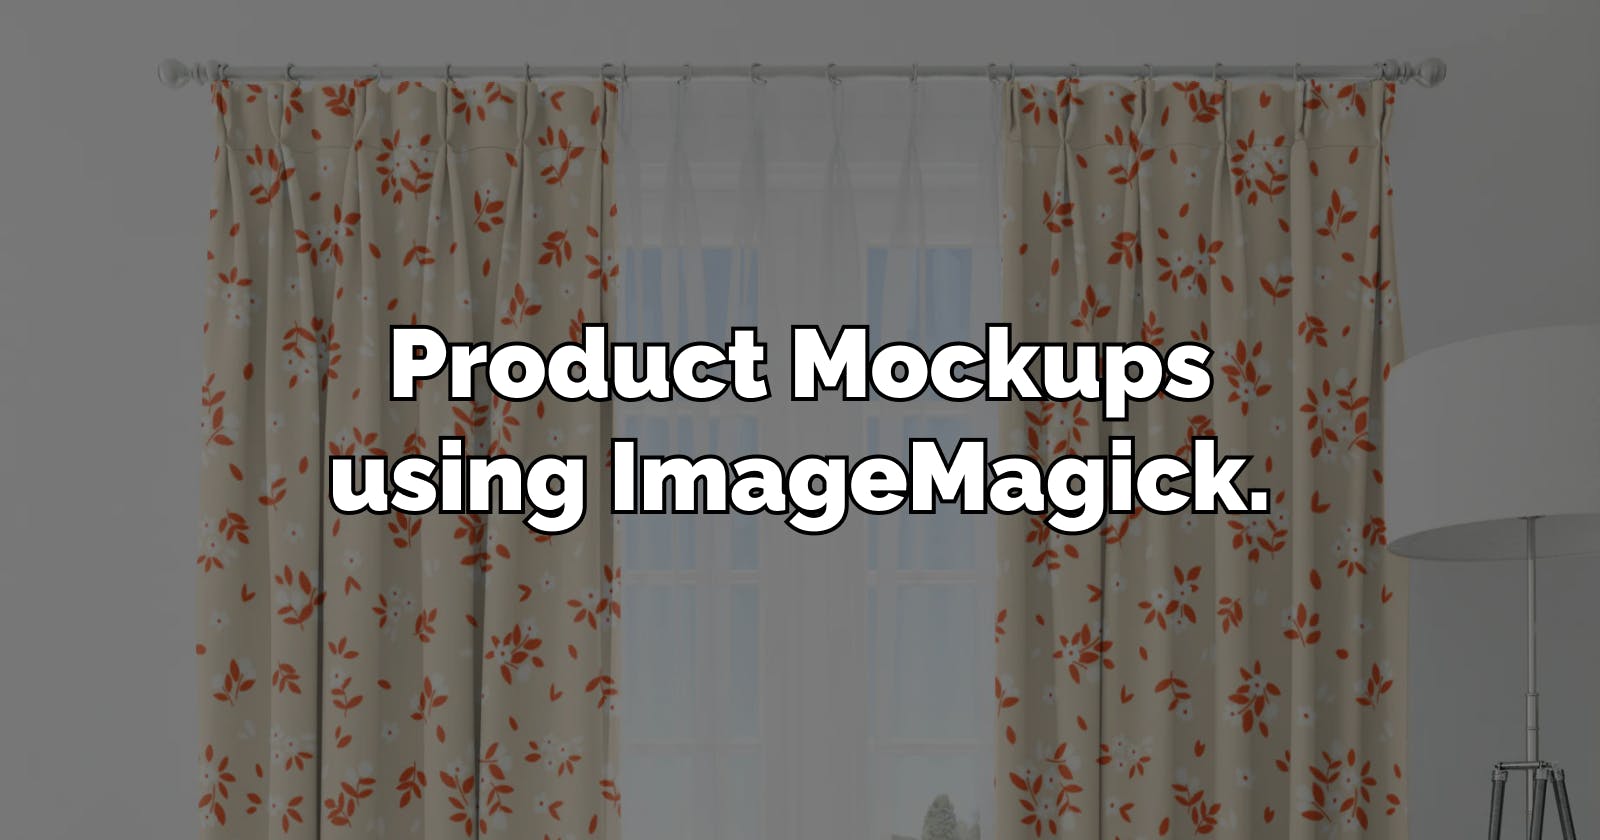 How ImageMagick helped me create perfect product mockups